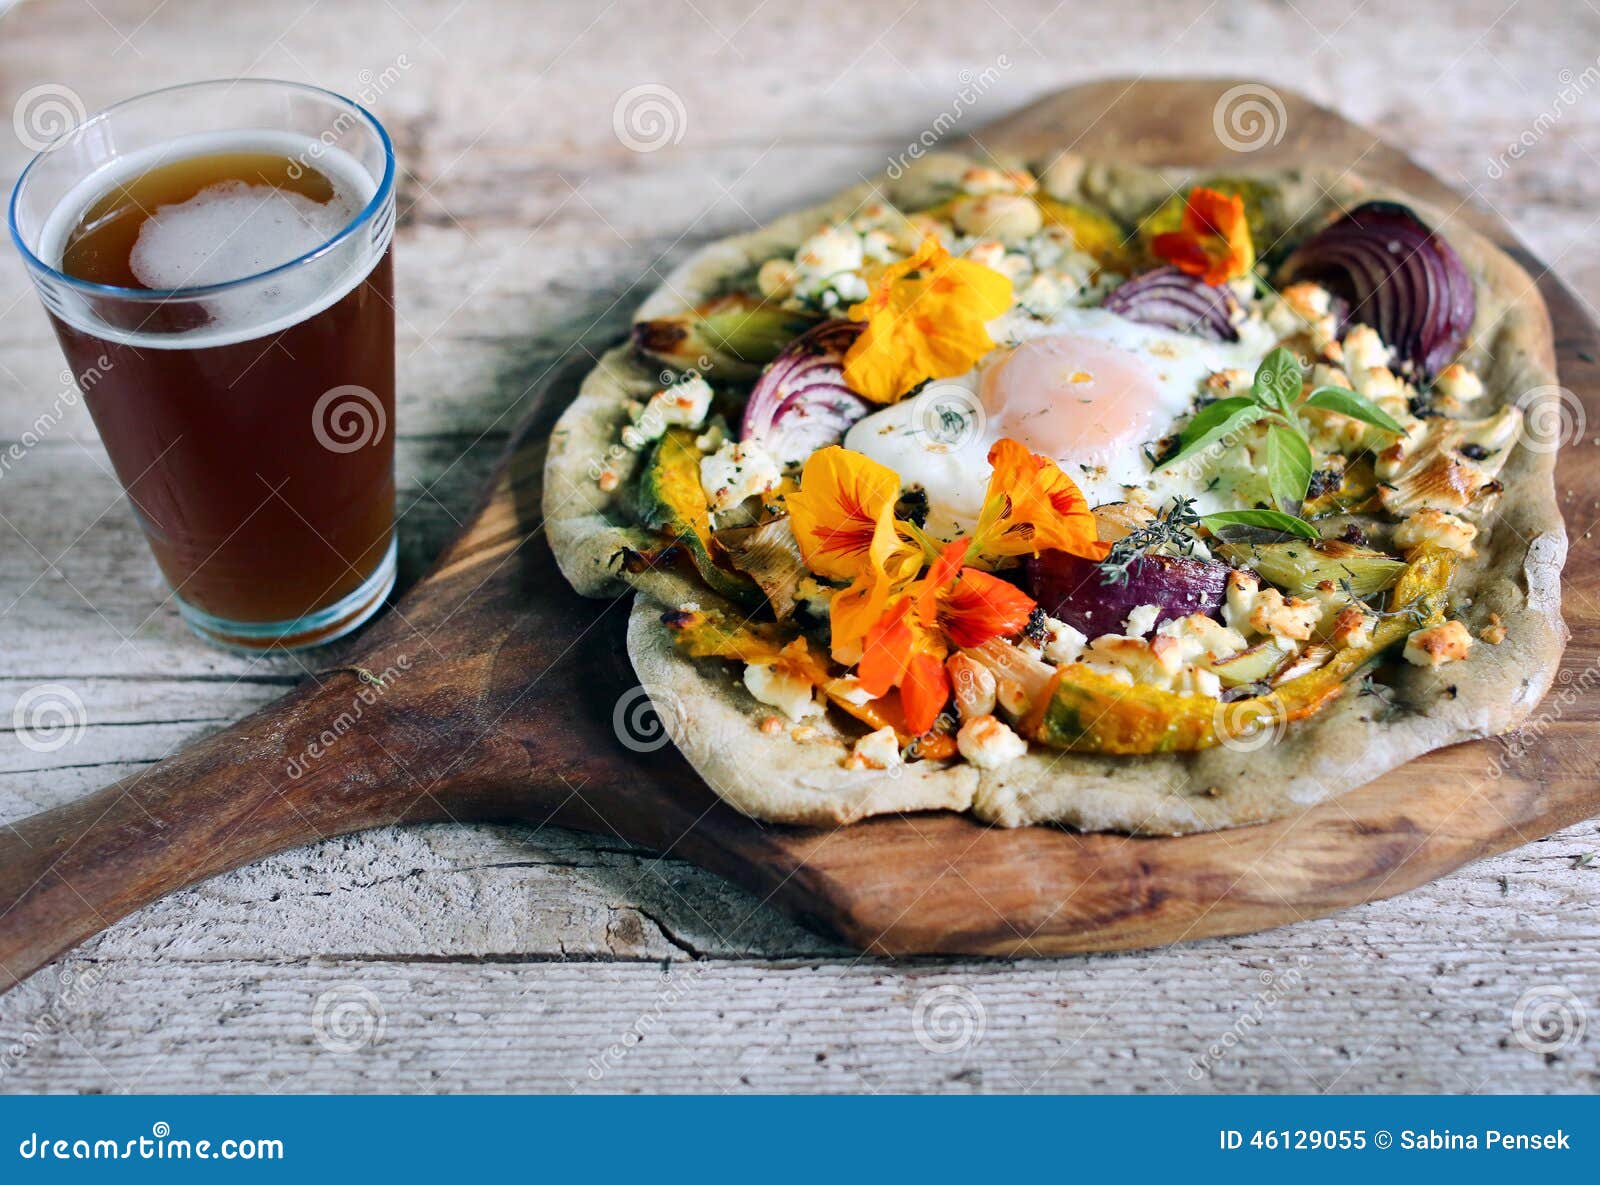 Root Vegetables Pizza With Cottage Cheese Egg And Flowers Stock